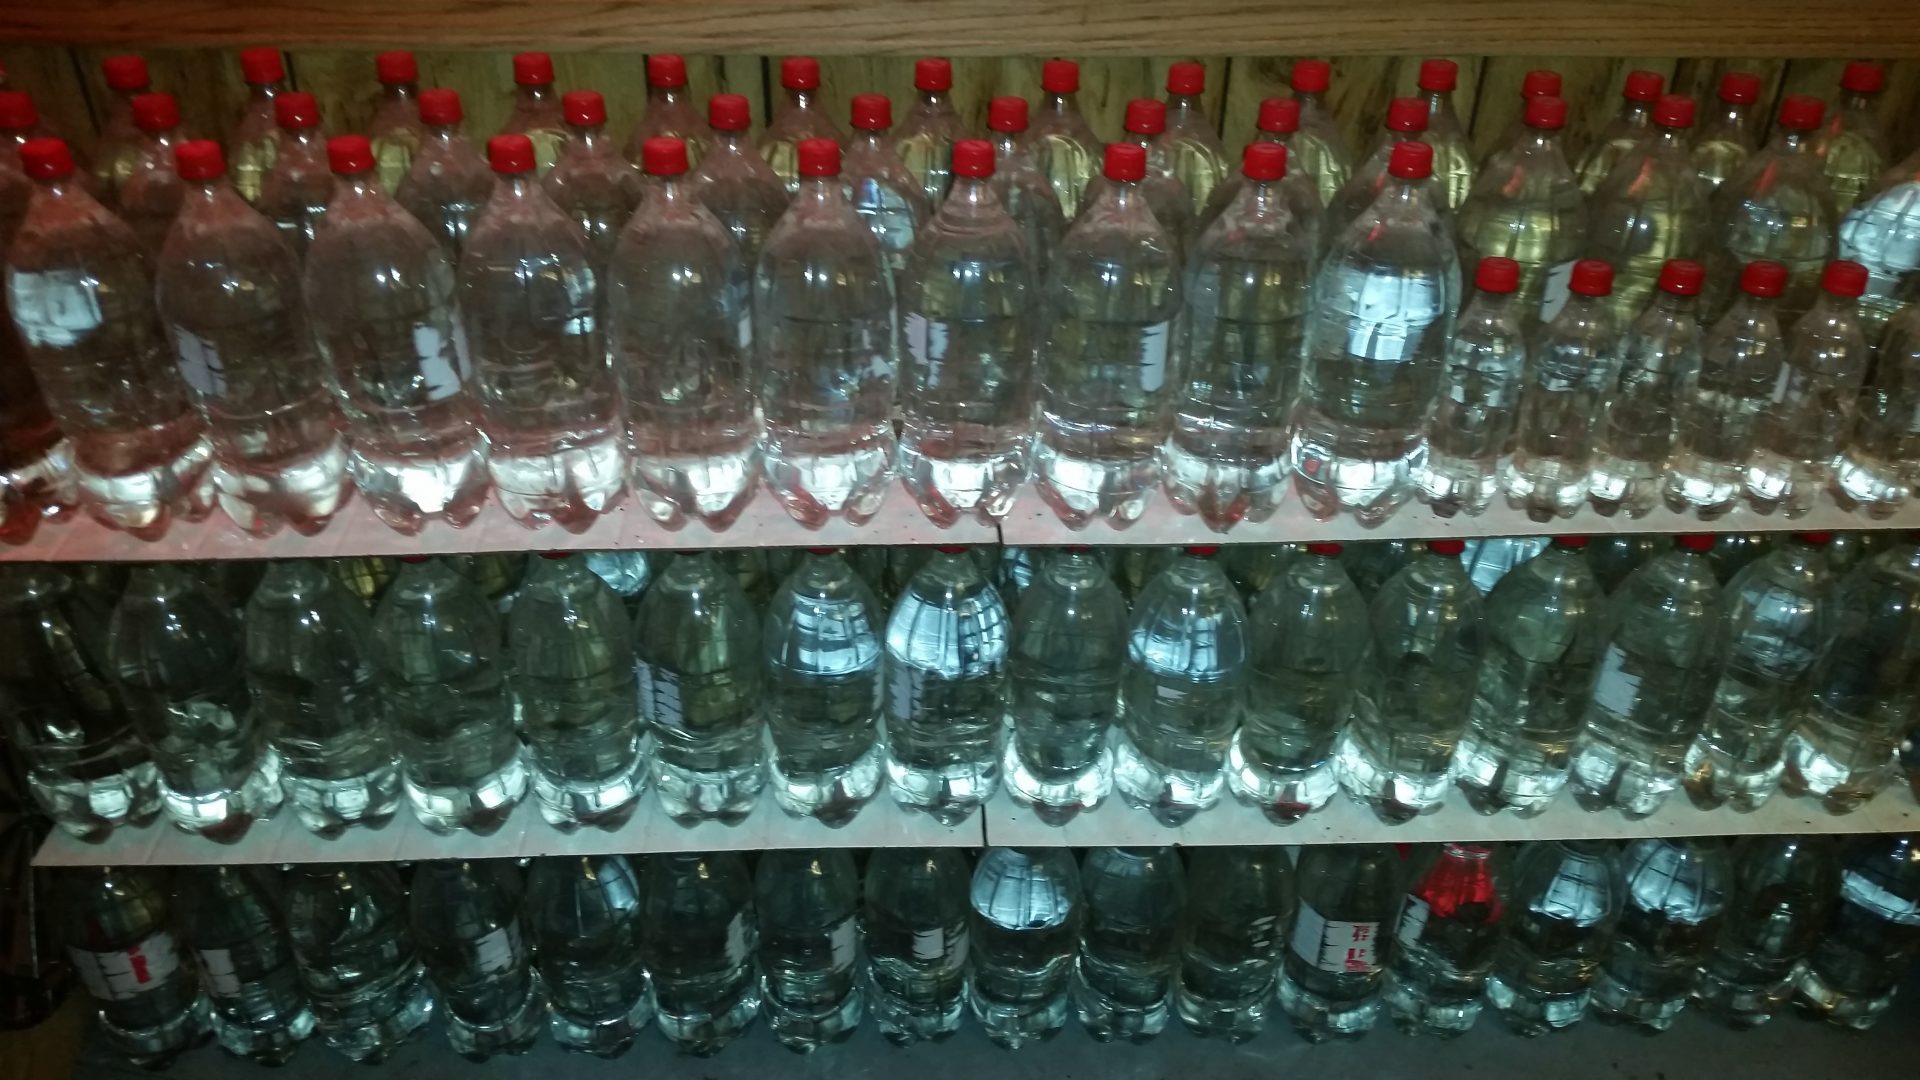 In this undated photo provided by Paul Buescher, water is stored in stacks of 2-liter bottles in a barn near Garrettsville, Ohio. The water can be used by 32 members of a group in northeastern Ohio that shares a farm packed with enough canned and dehydrated food and water to last for years. For those in the often-mocked "prepper" community, this is quickly becoming their "I told you so" moment, as panic buying has cleared store shelves across the U.S. amid growing fears that the new coronavirus will force many Americans to self-quarantine for weeks in their homes.